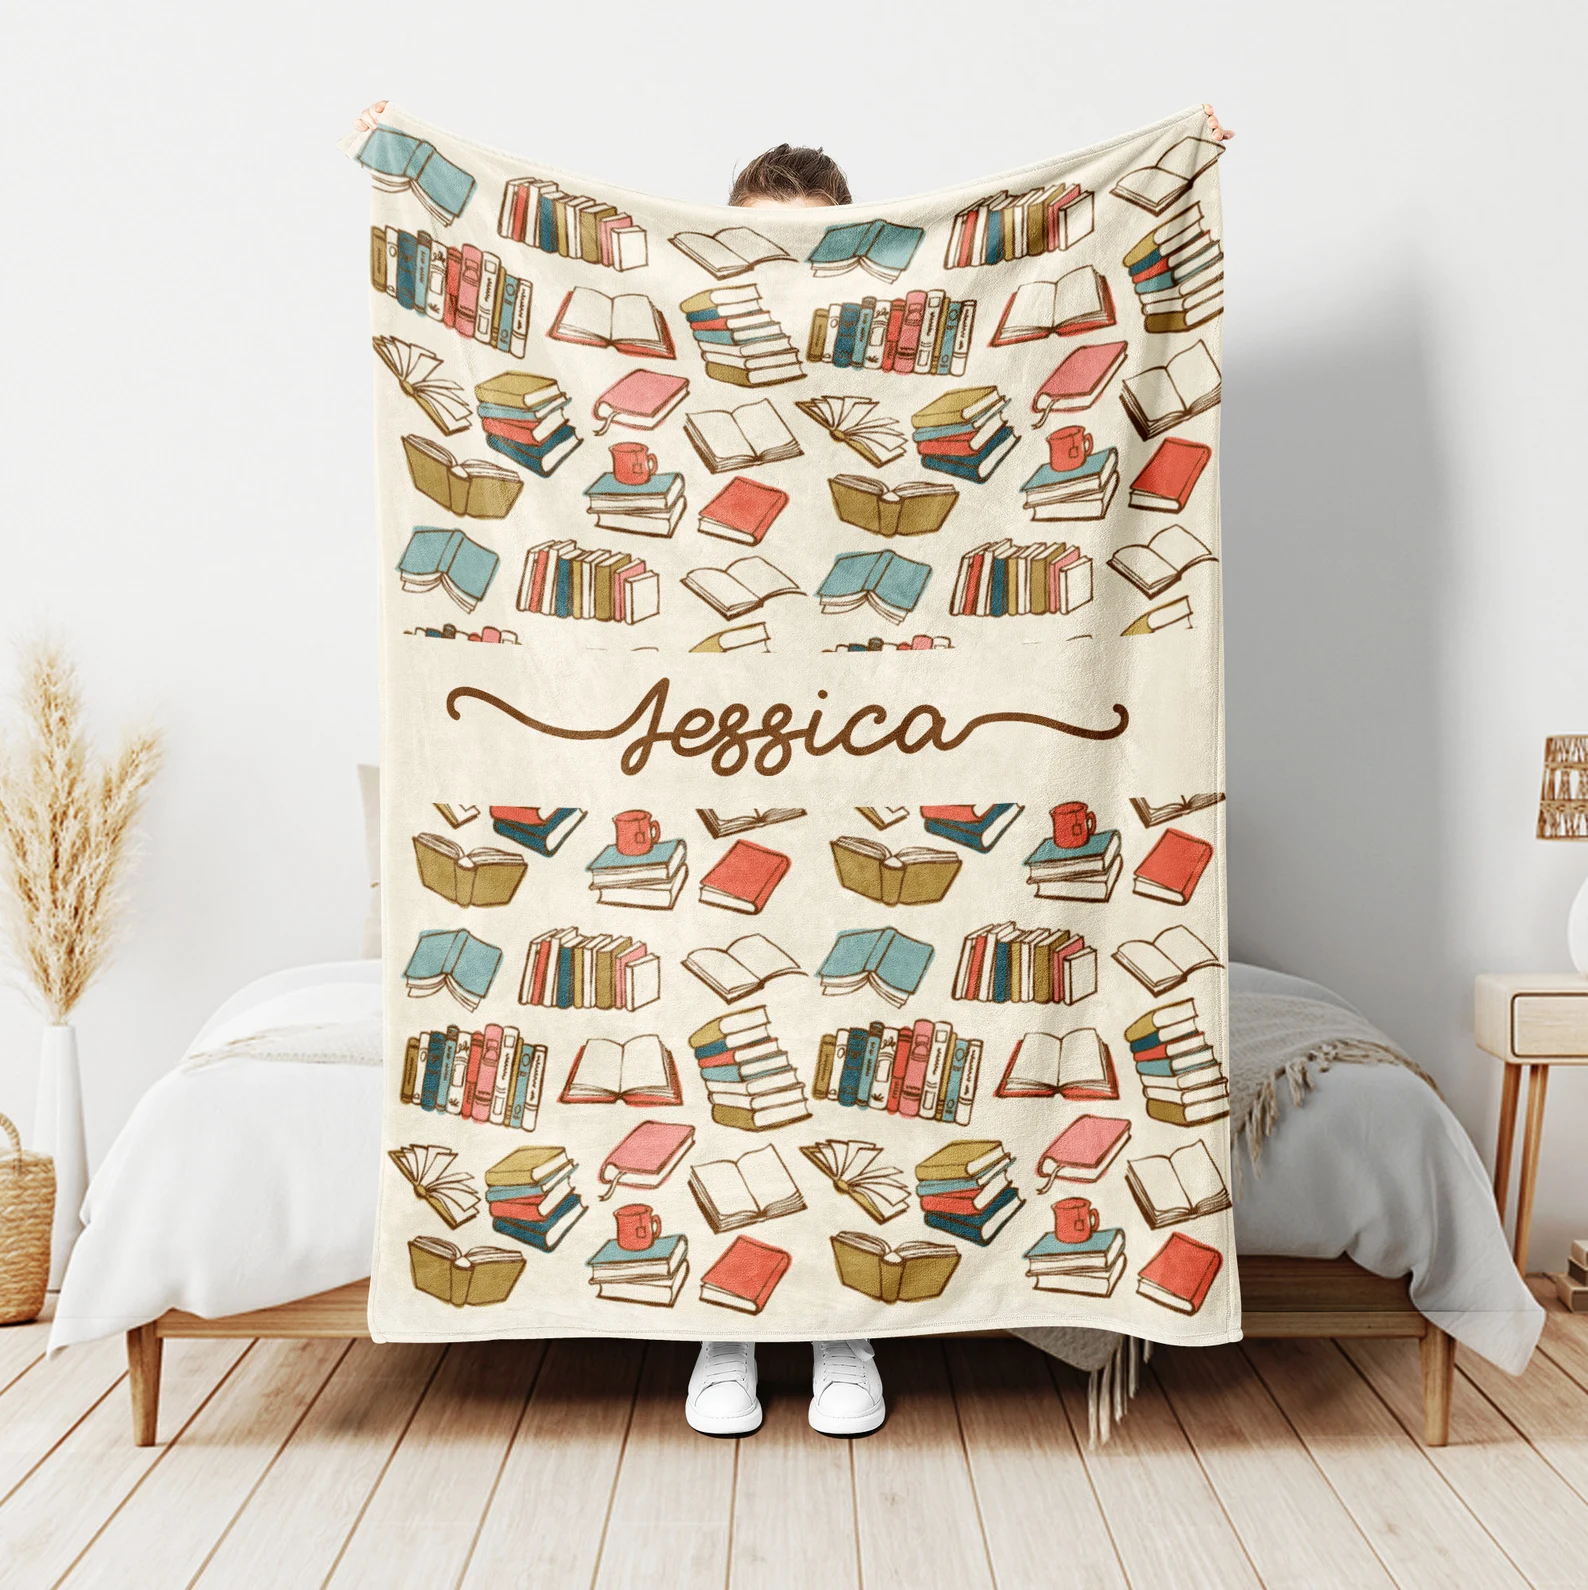 a photo of someone holding up a blanket featuring books designs and the name "Jessica"